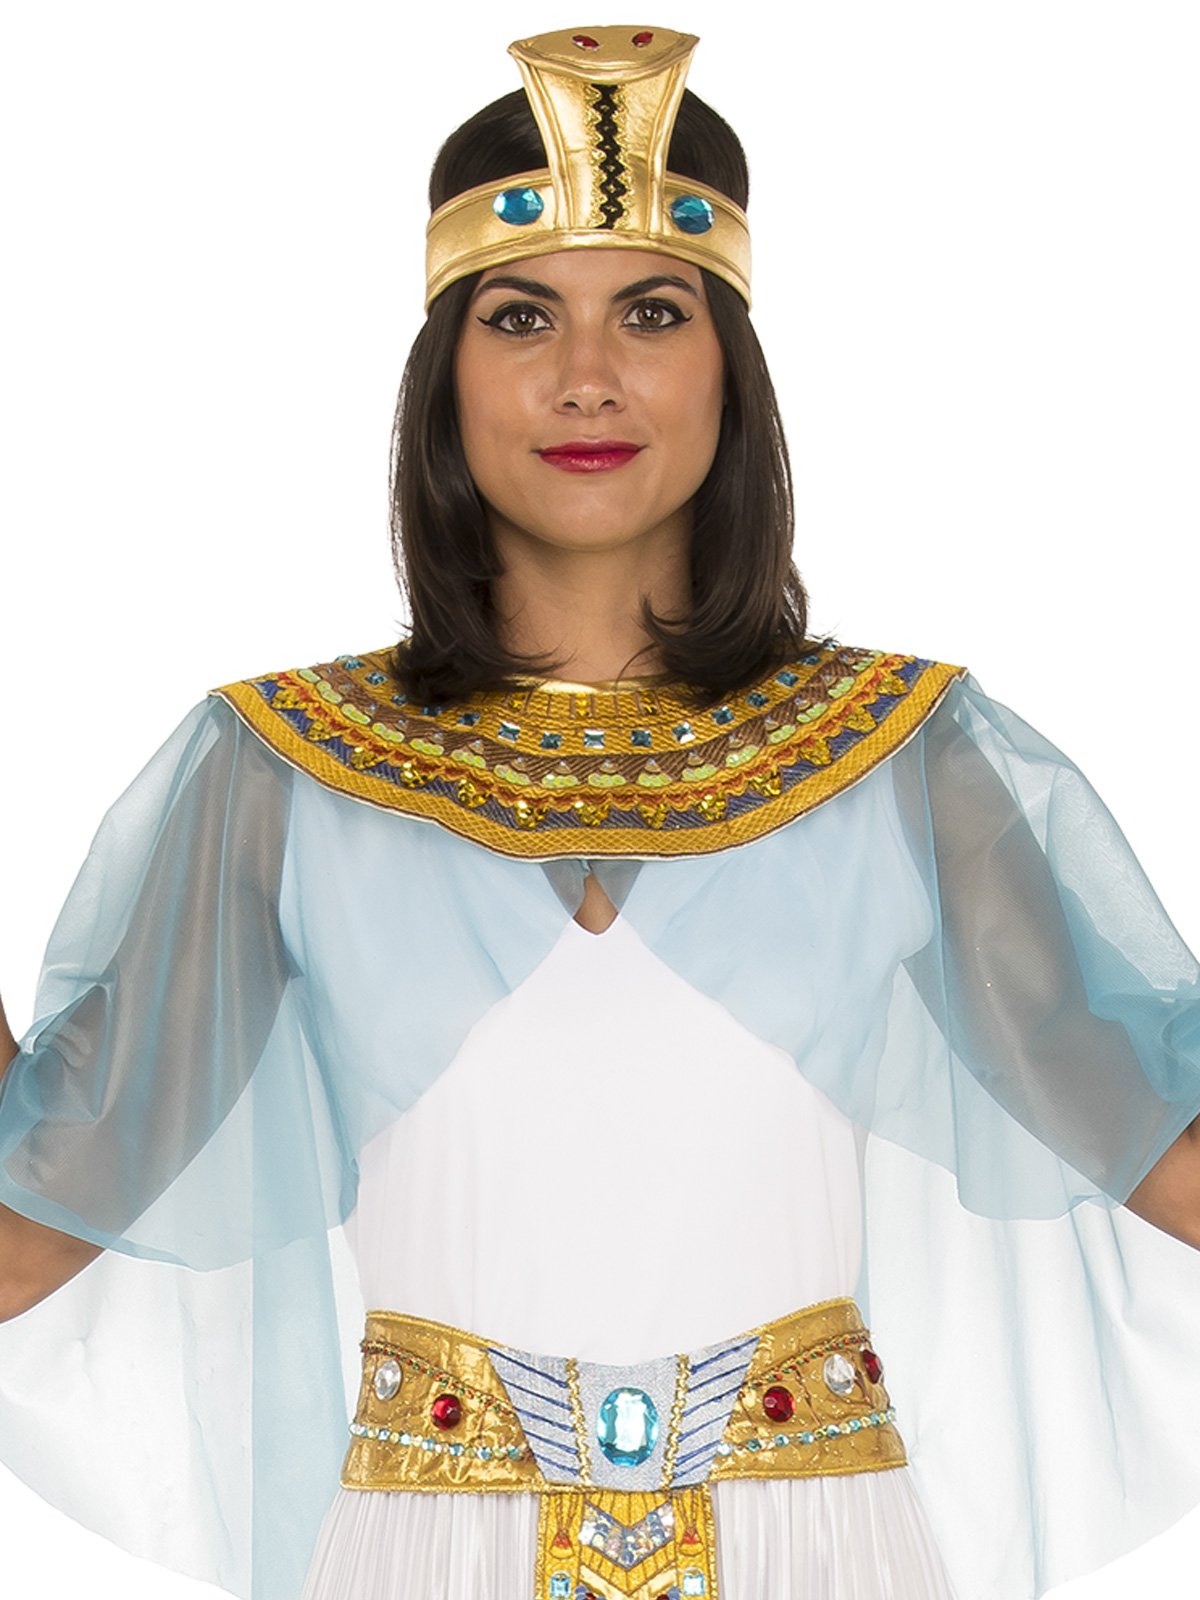 Costume Adult Egyptian Queen White Cleopatra